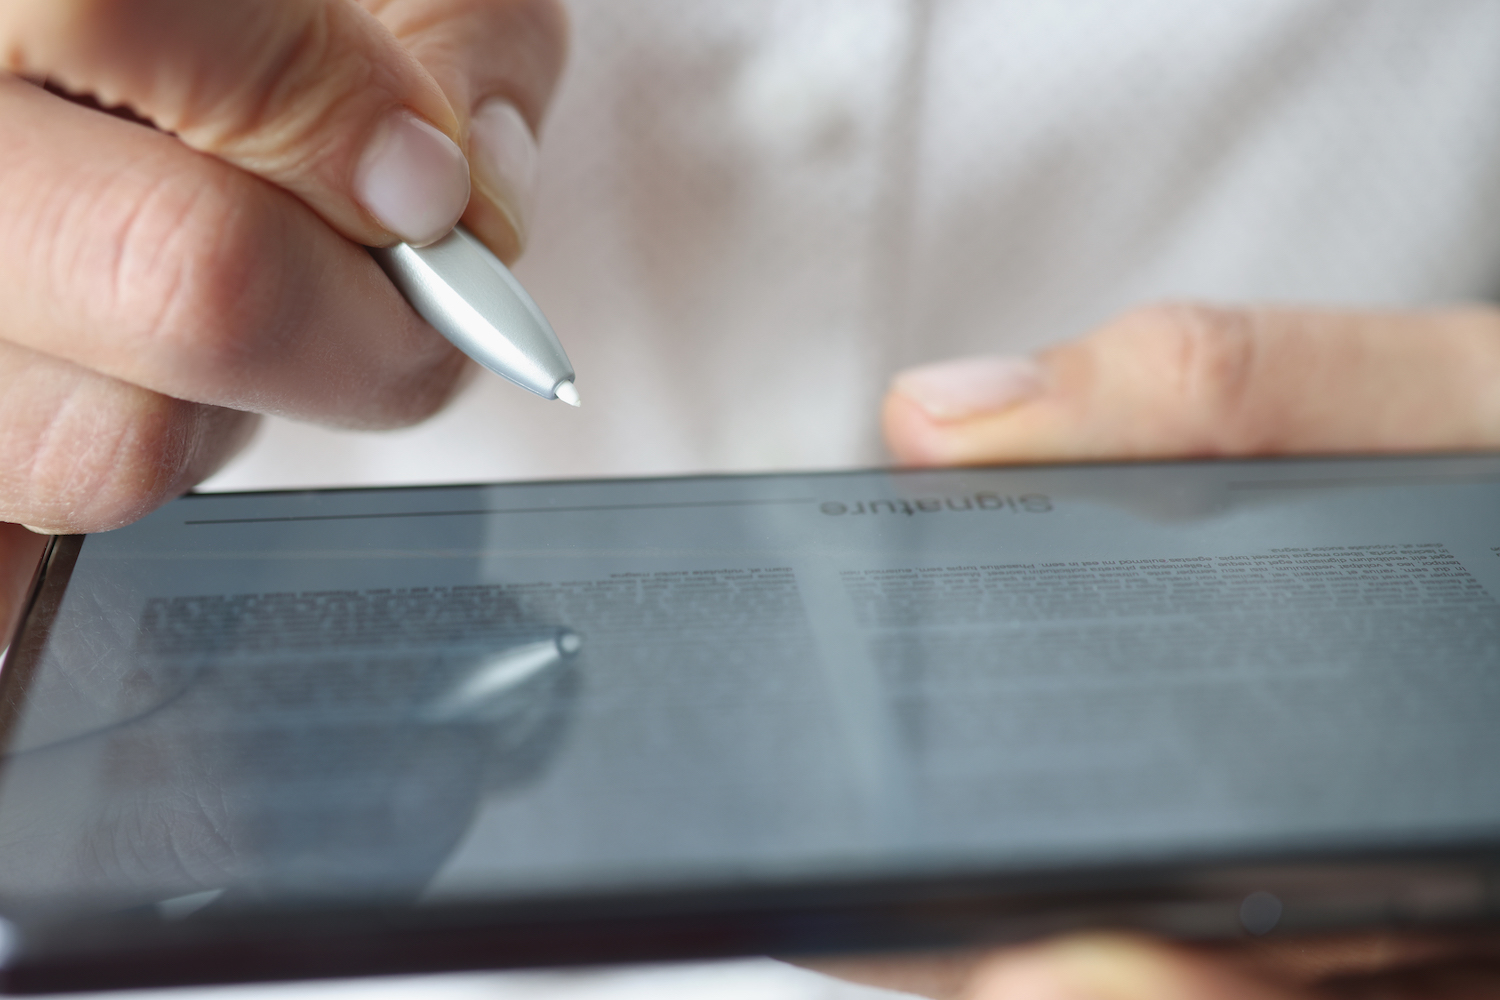 Picture of an iPad being held and a stylus pen being used to operate it